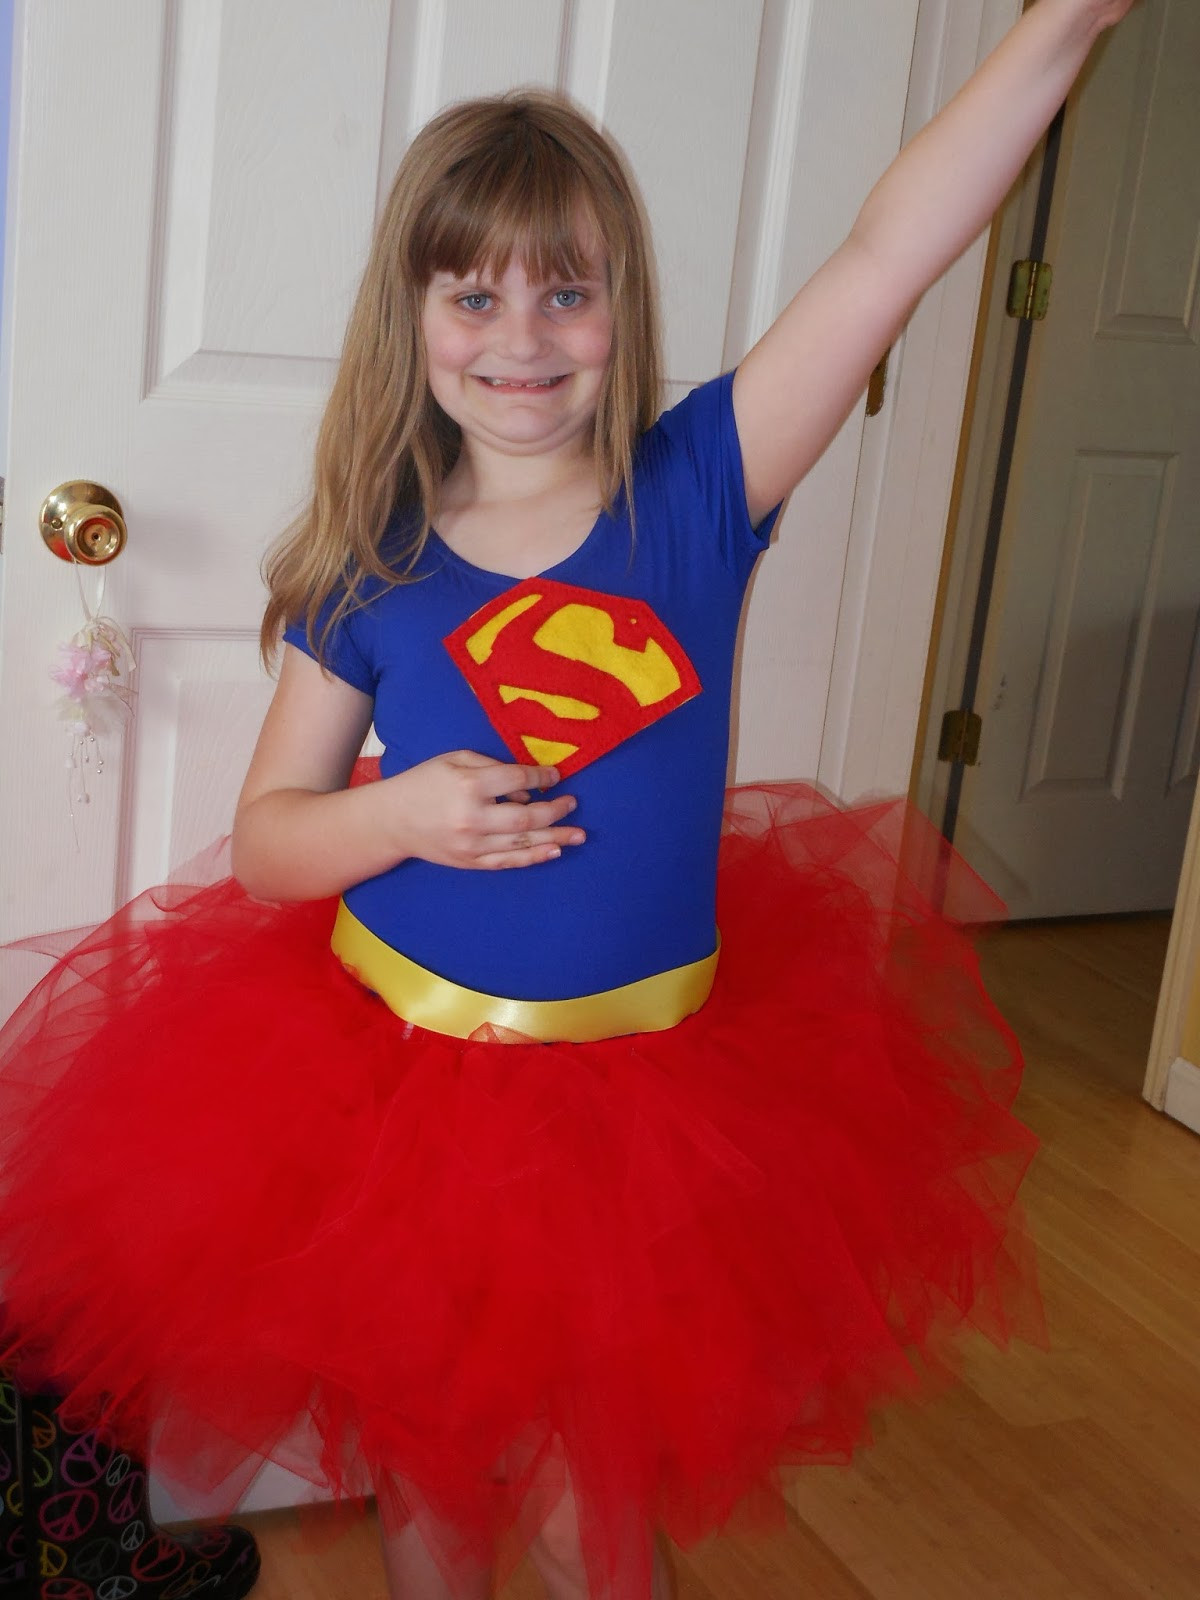 DIY Superhero Costume For Girls
 Sunny Days With My Loves Adventures in Homemaking In